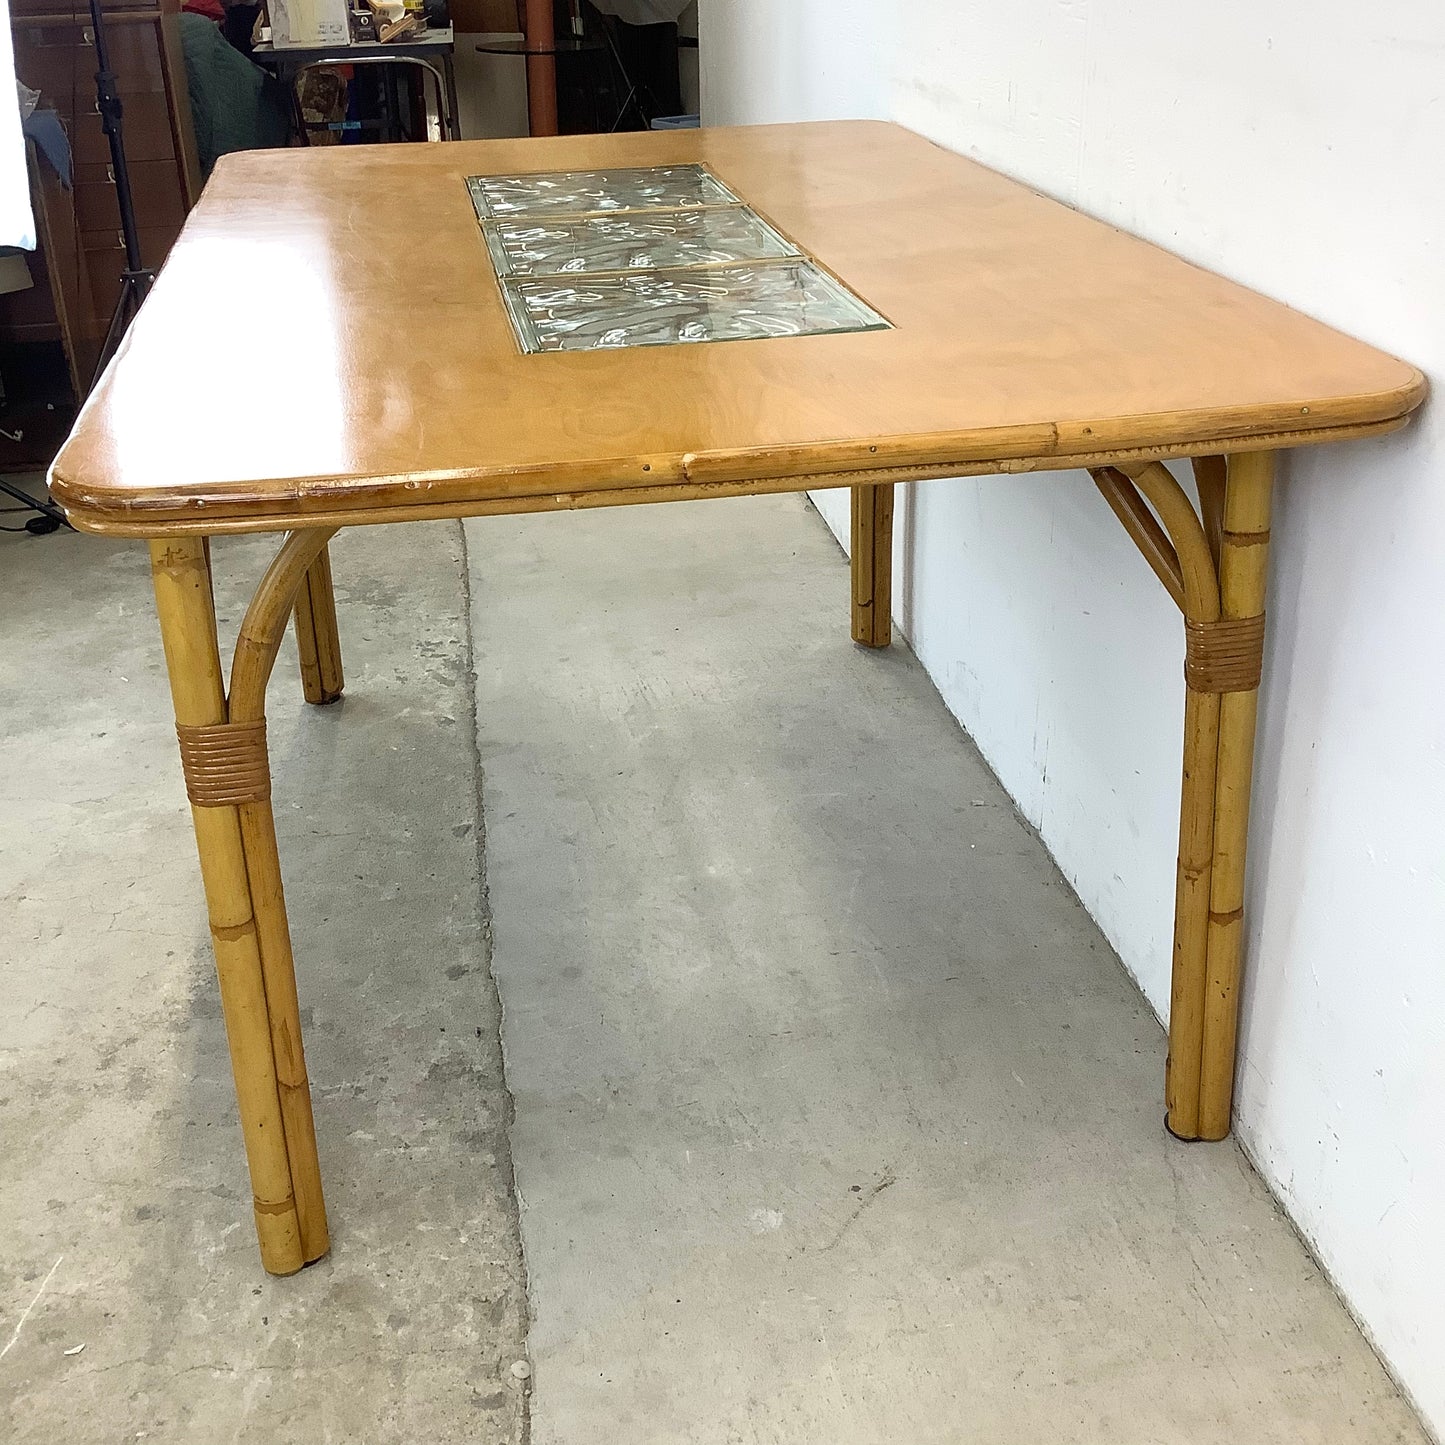 Vintage Bamboo Dining Table With Glass Inserts